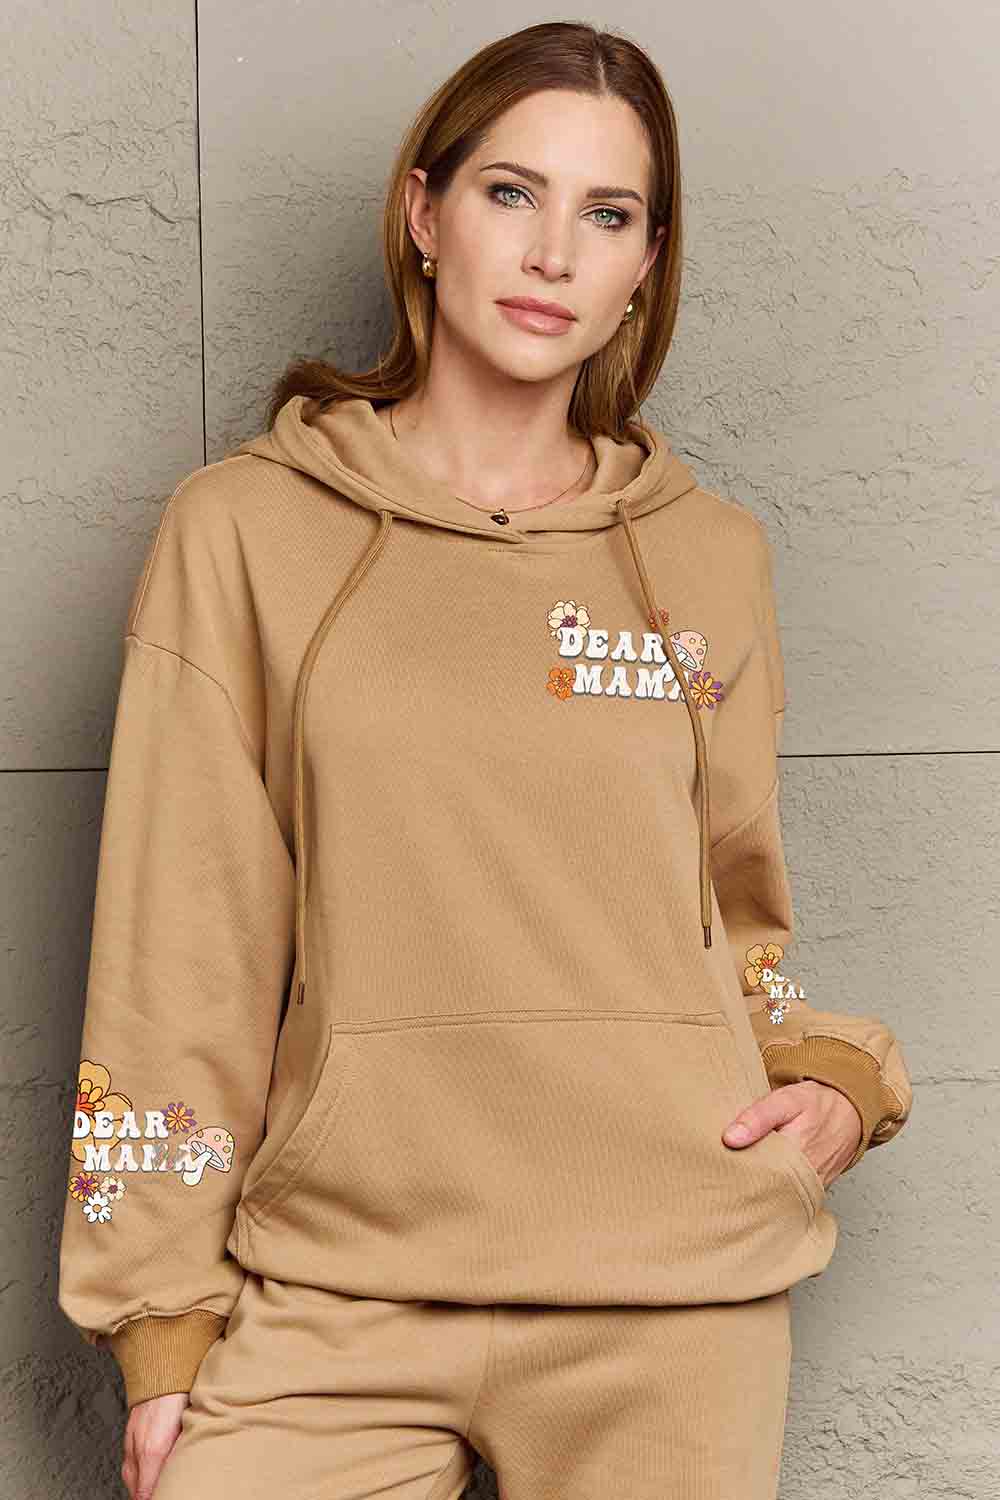 Simply Love Simply Love Full Size DEAR MAMA Flower Graphic Hoodie